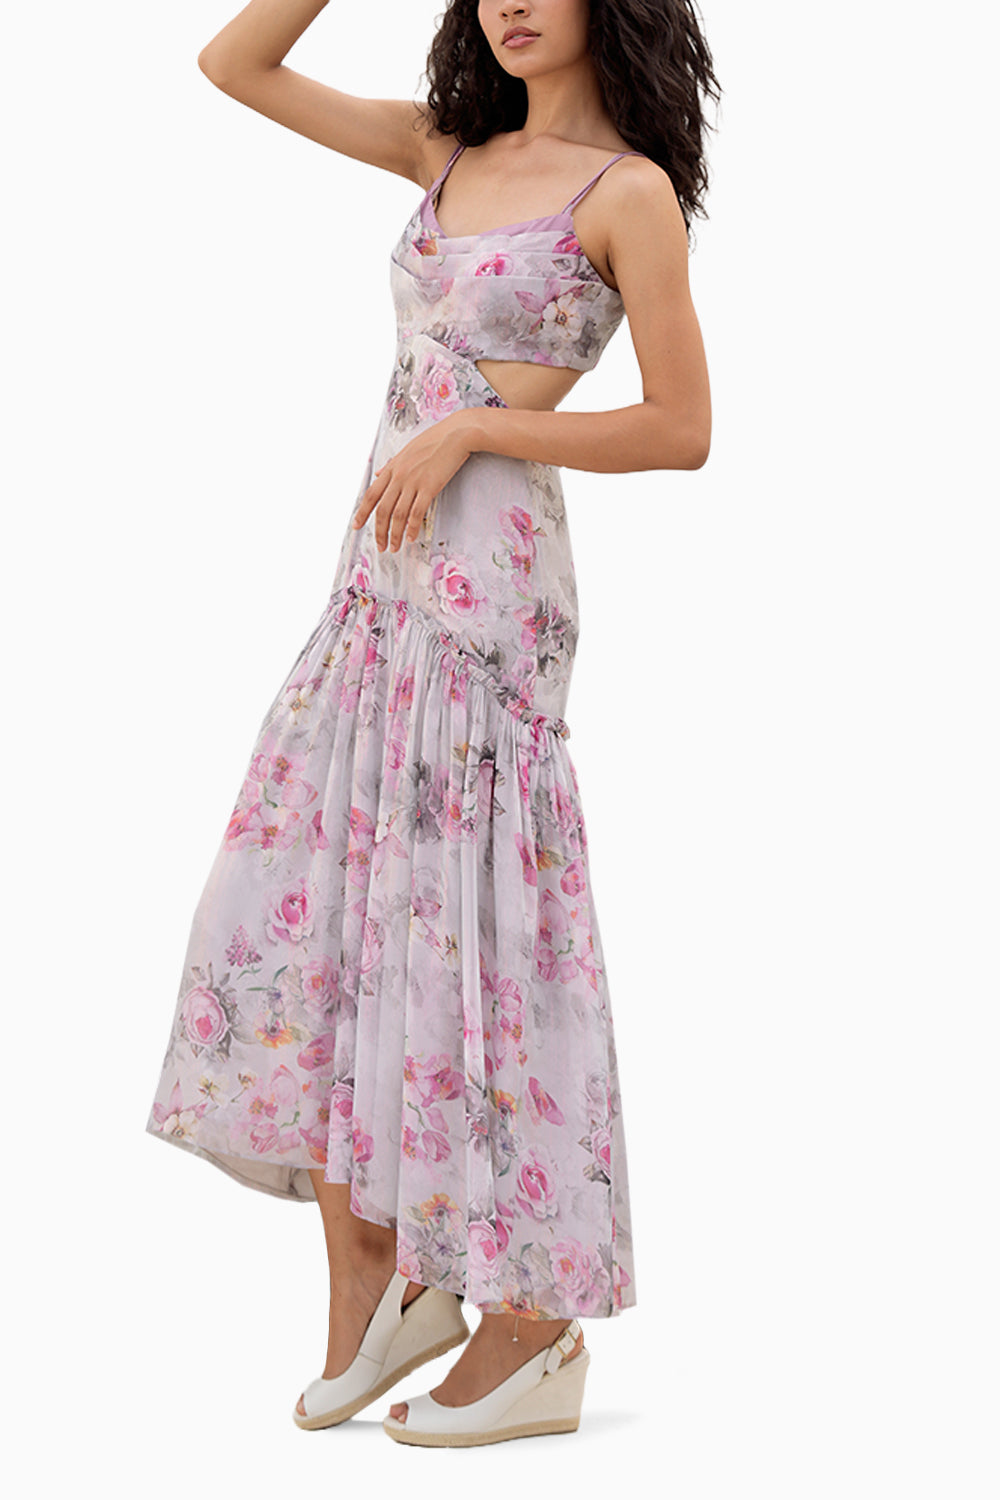 Can't Help Falling In Love Floral Maxi Dress